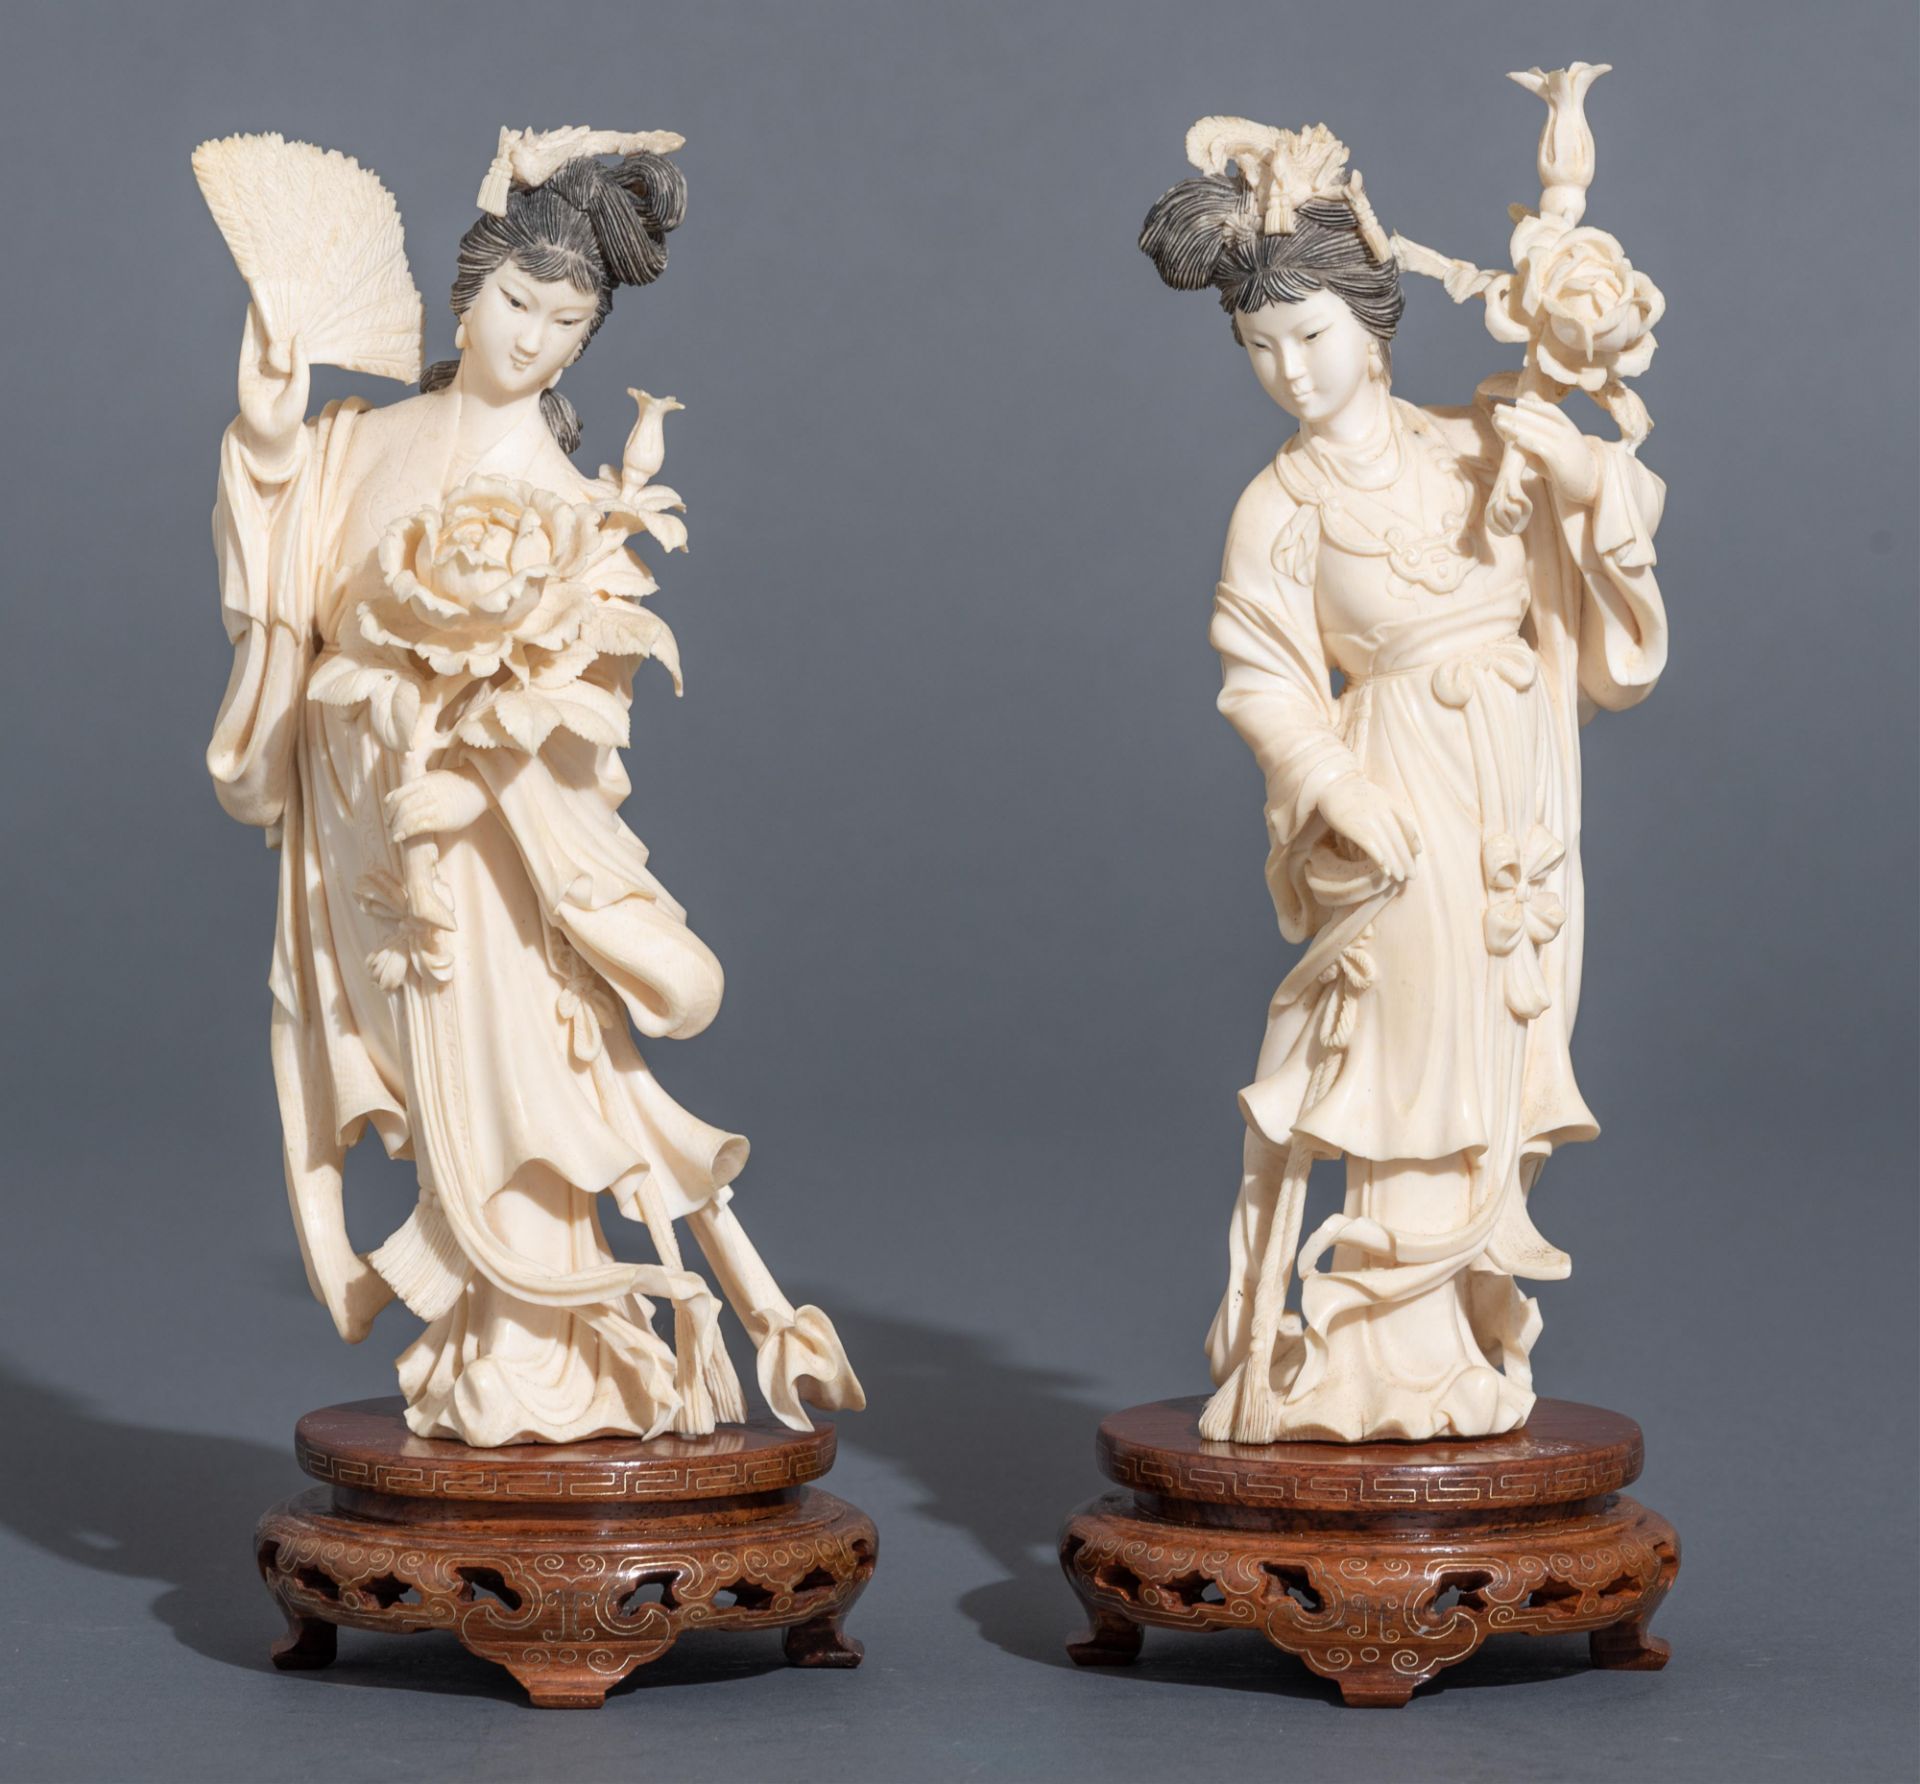 Two ivory Chinese beauties on wooden bases, first half 20thC, H 24 - 25 cm, - Image 2 of 6